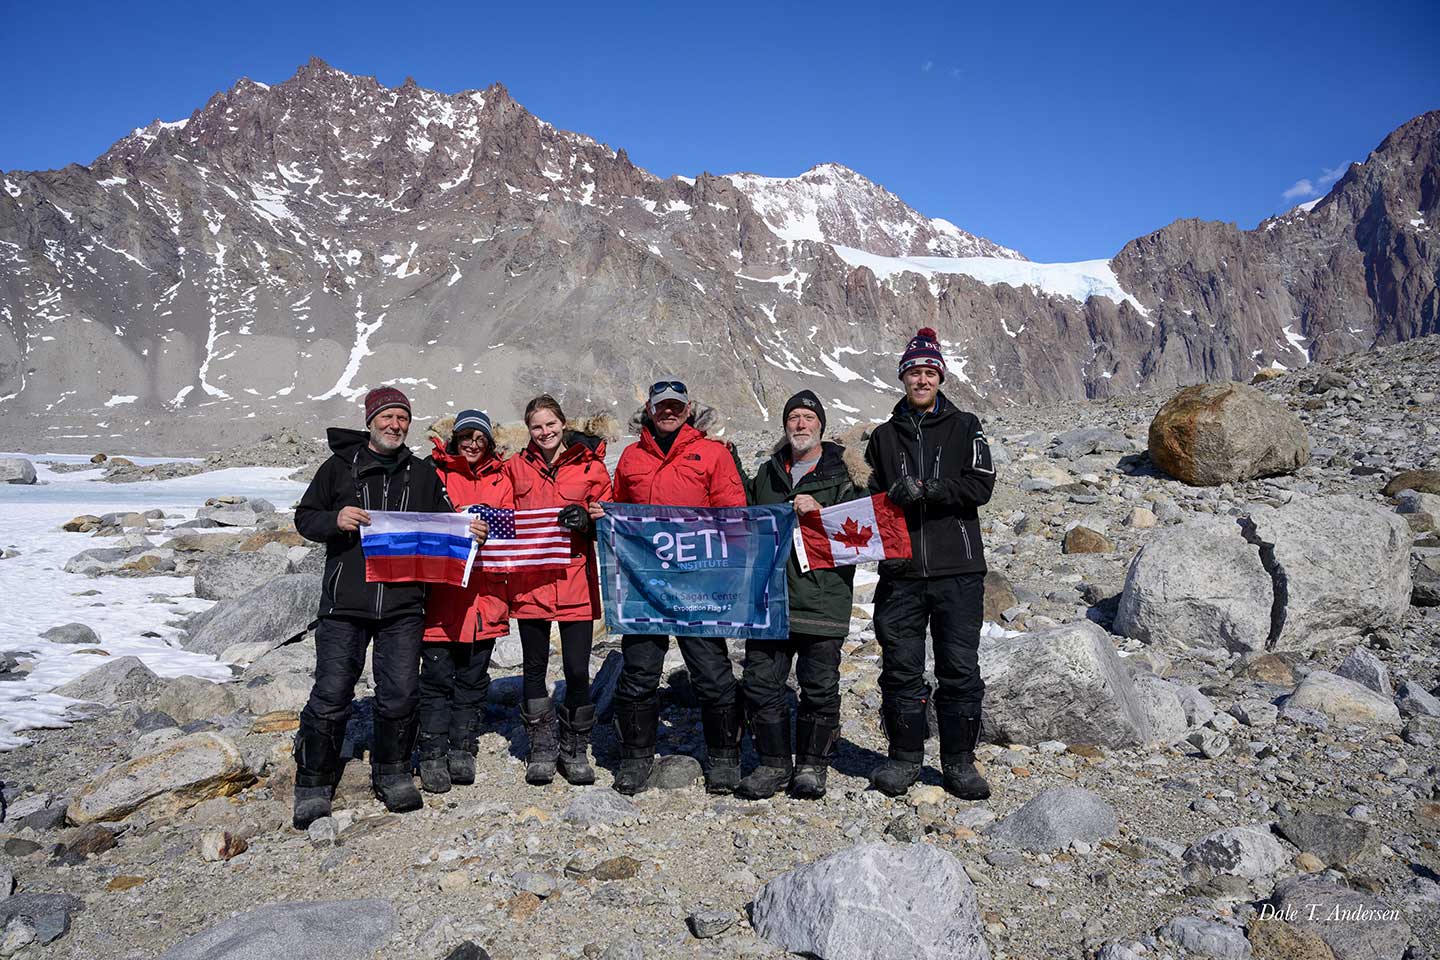 Dale Andersen and team with SETI Institute expedition flag